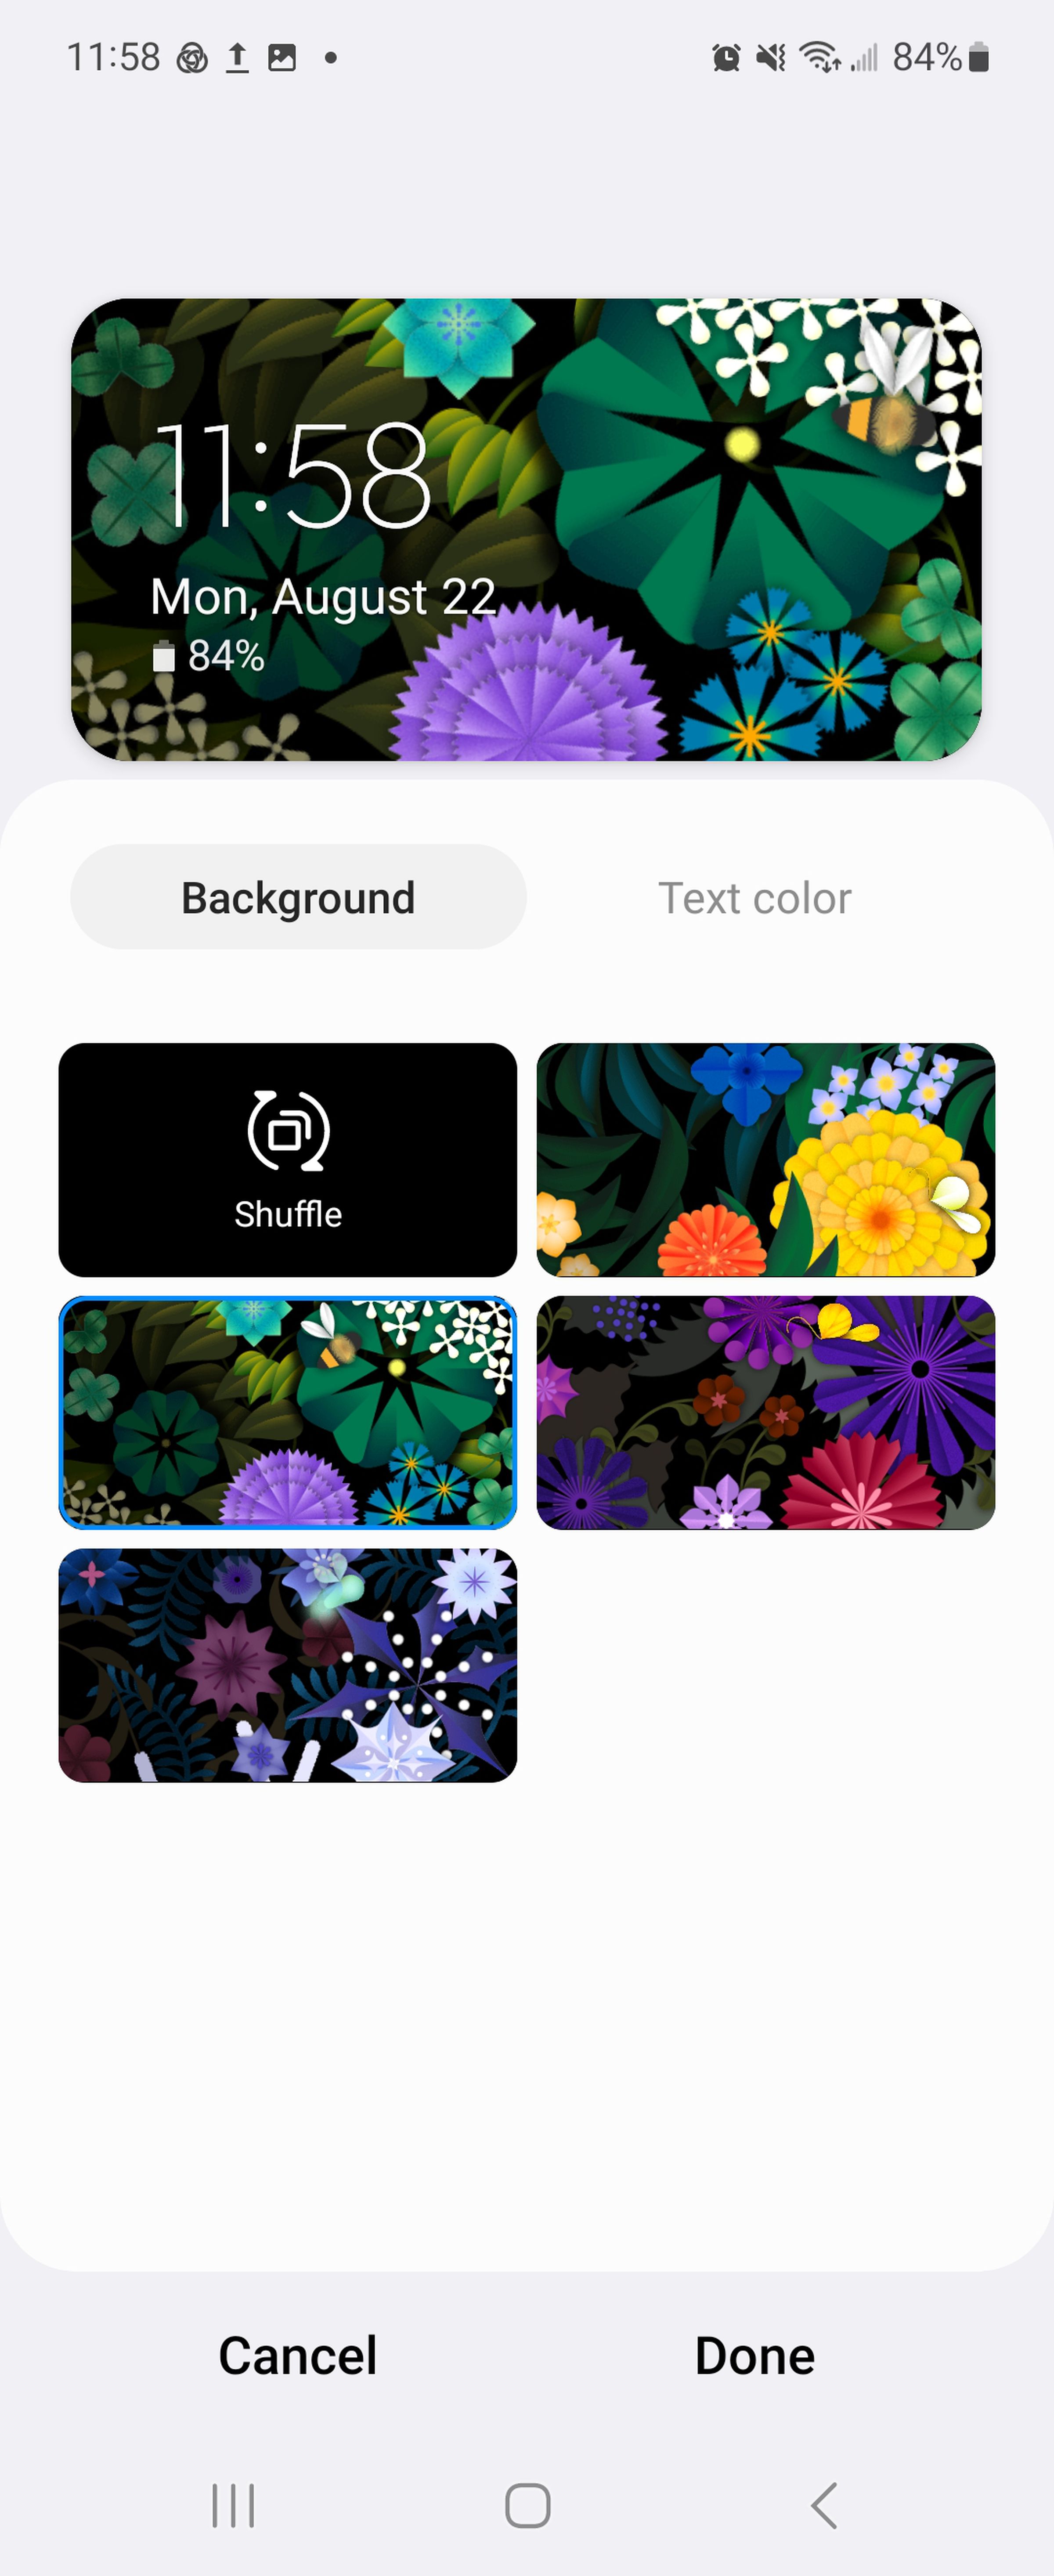 Some of the graphical backgrounds offer variations and color customizations.